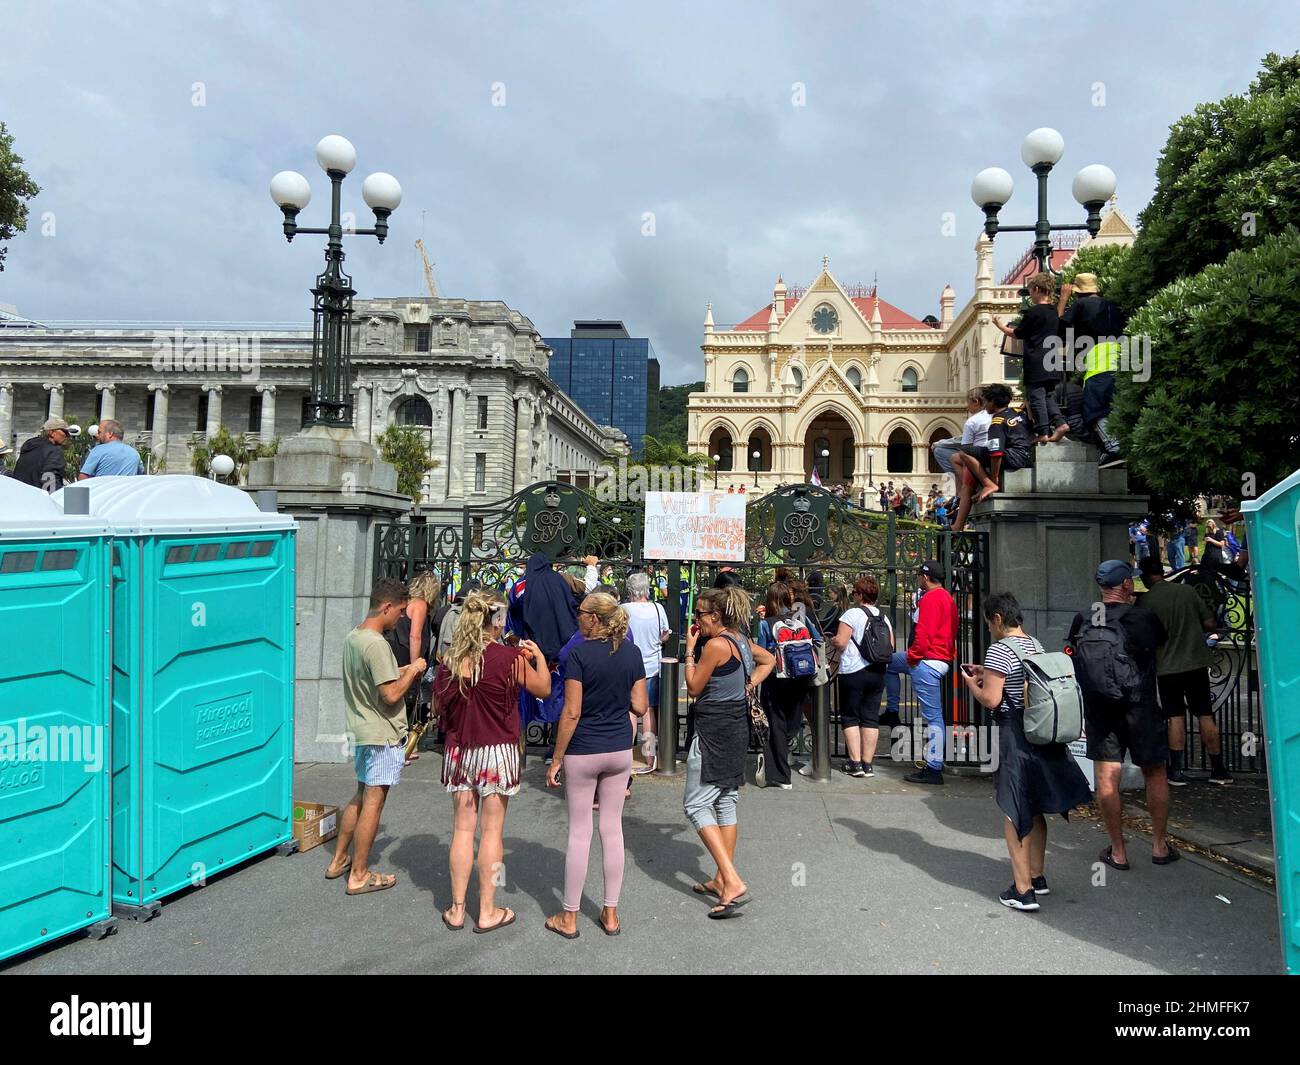 Anti-vaccine mandate protesters gather to demonstrate in front of the parliament in Wellington, New Zealand, February 10, 2022. REUTERS/Praveen Menon Stock Photo